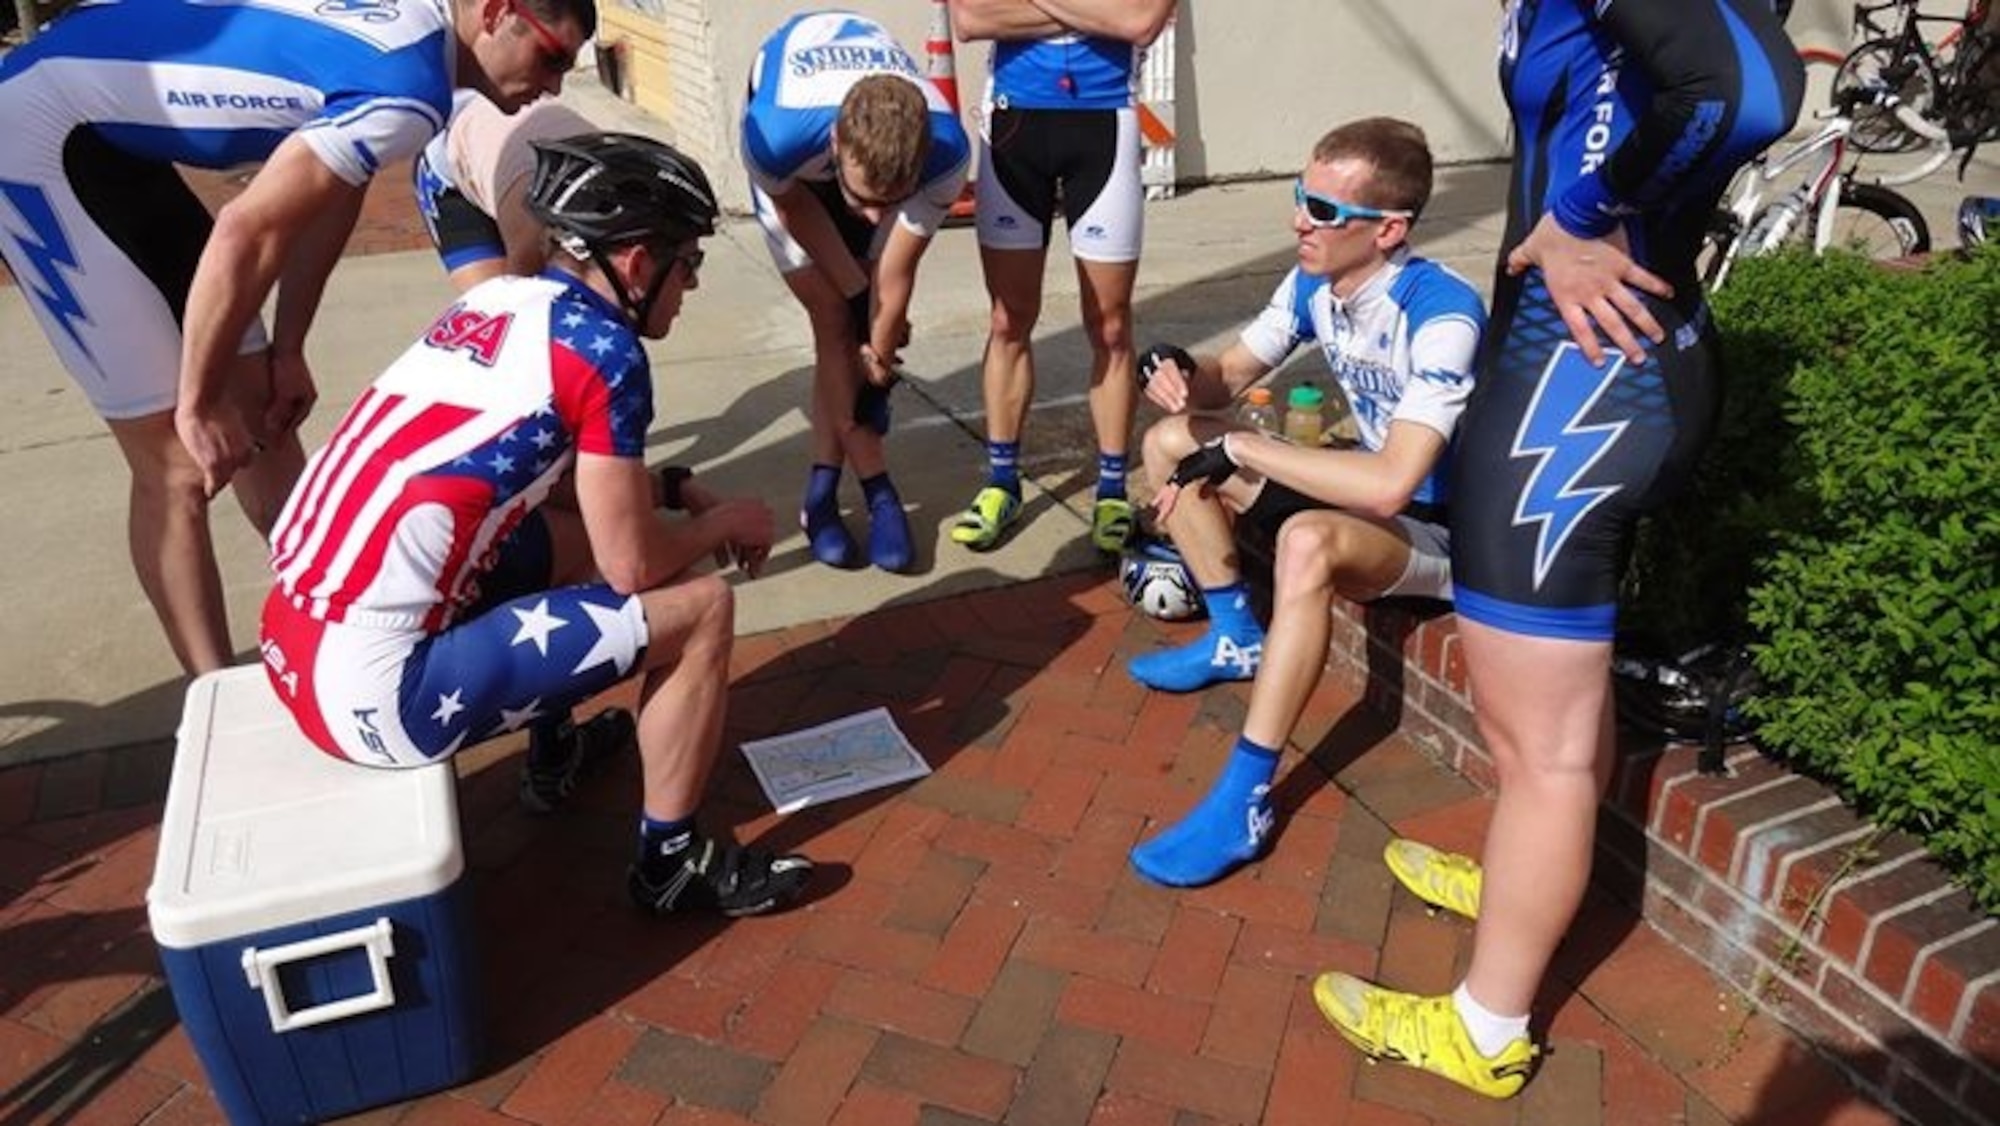 Maj. Ian Holt, seated left, shares strategy and wisdom with members of the U.S. Air Force Academy Falcons cycling team as they prepare for a 2014 team time trial in Richmond, Va. Holt is the Headquarters Air Force Space Command vault concepts lead. (Courtesy photo)